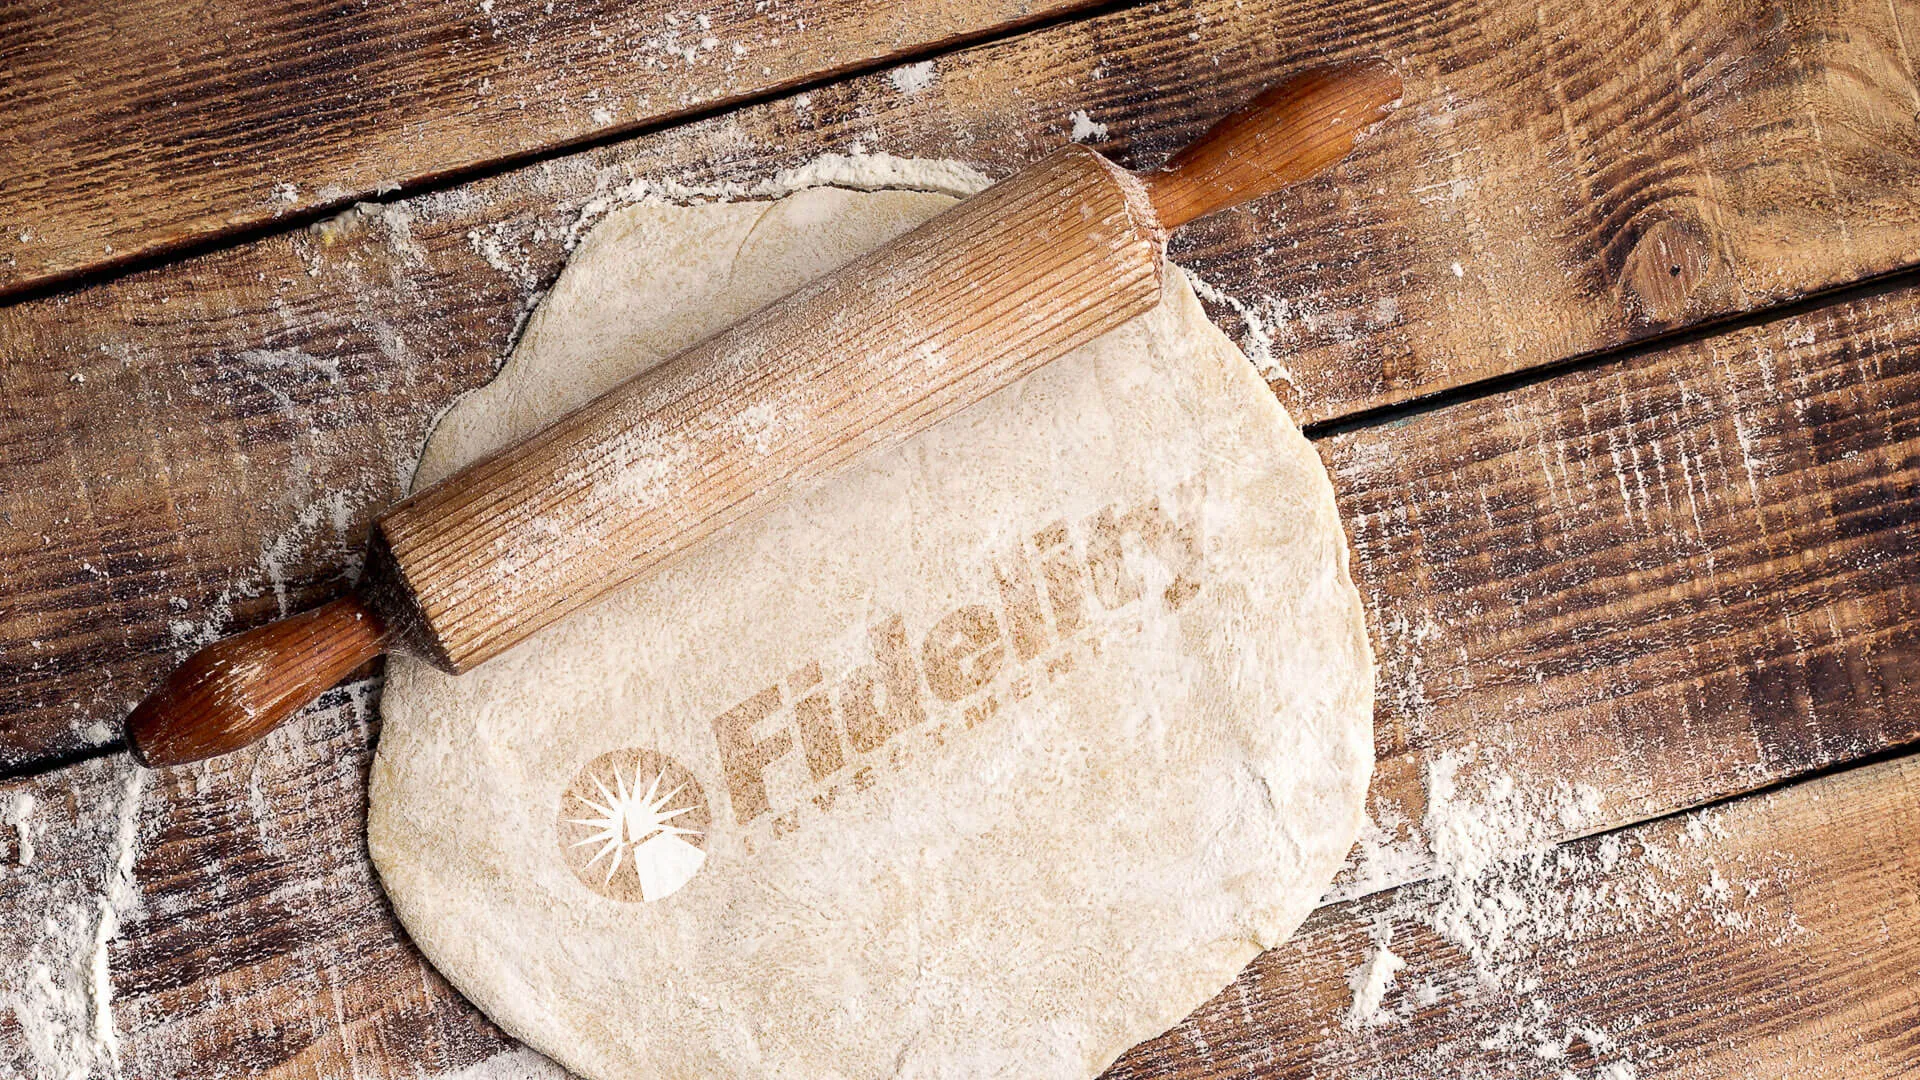 Fidelity Investments rolling pin with dough